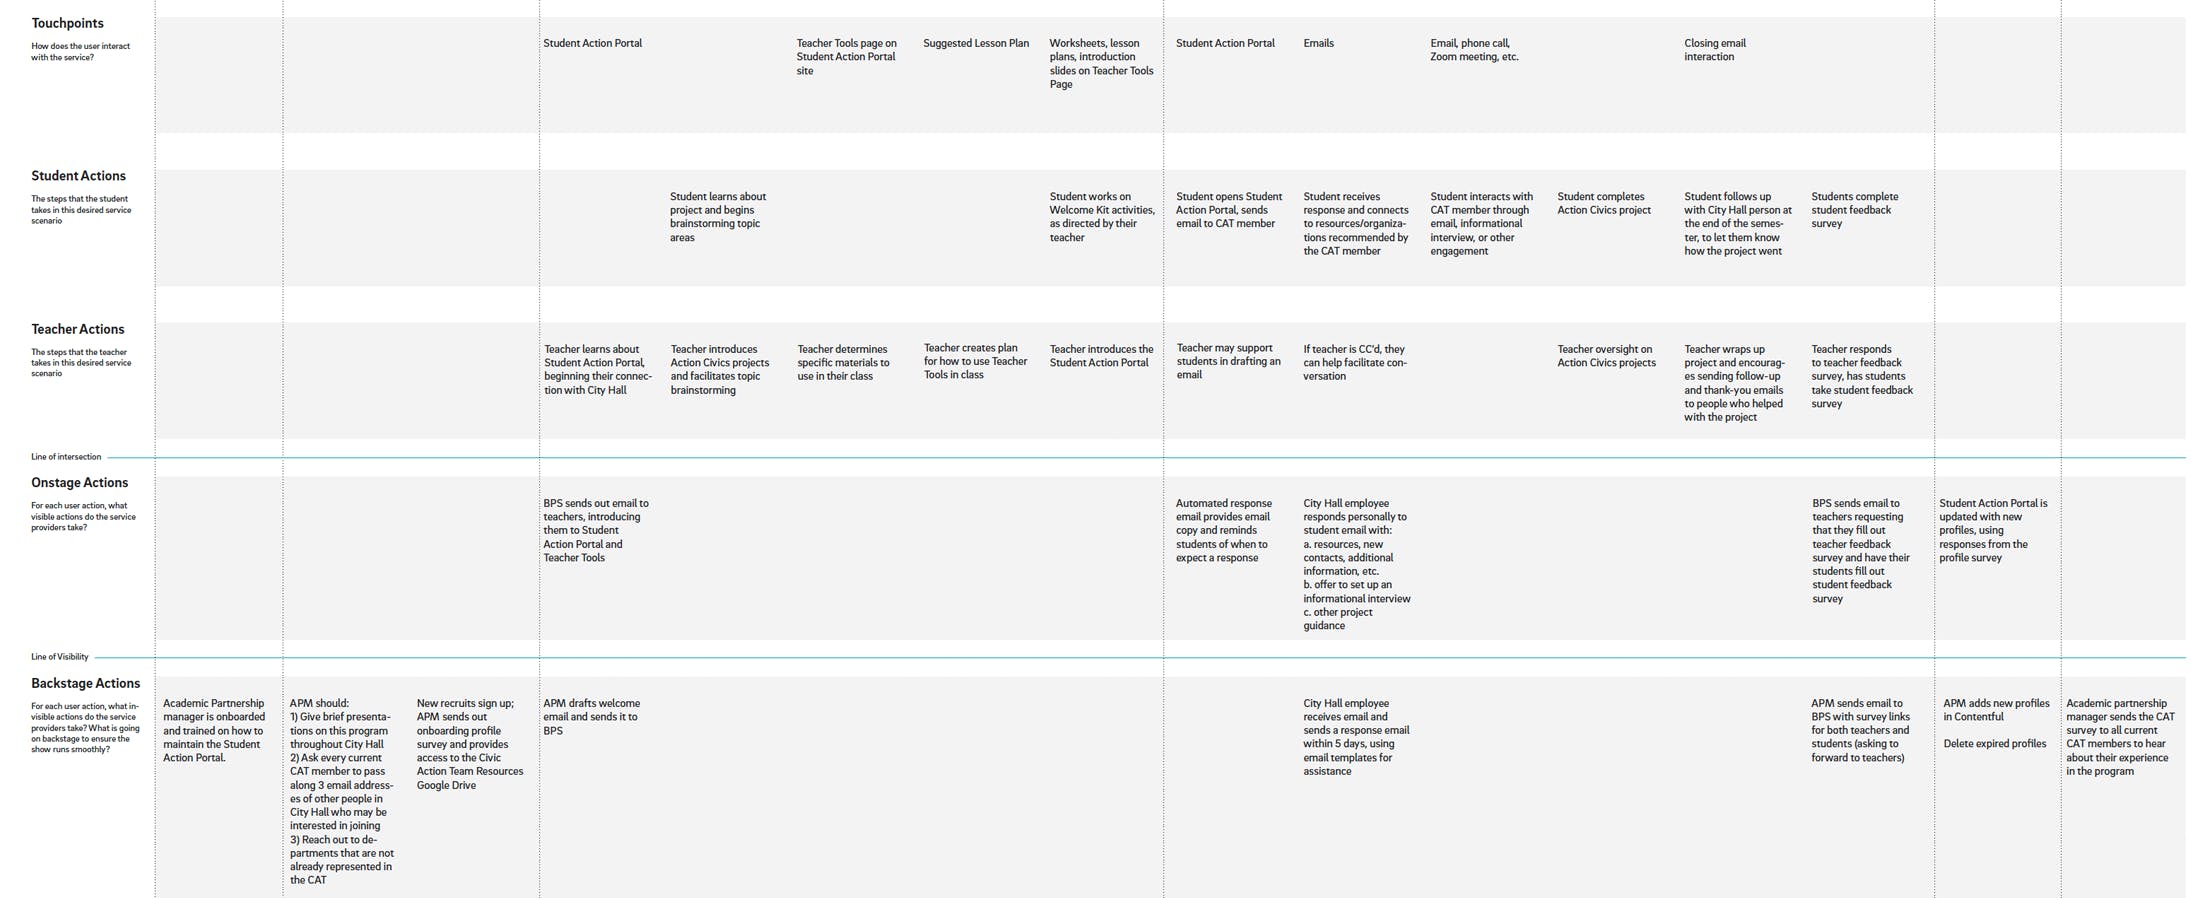 Service blueprint with 5 rows: Touchpoints, student actions, teacher actions, onstage actions, and backstage actions